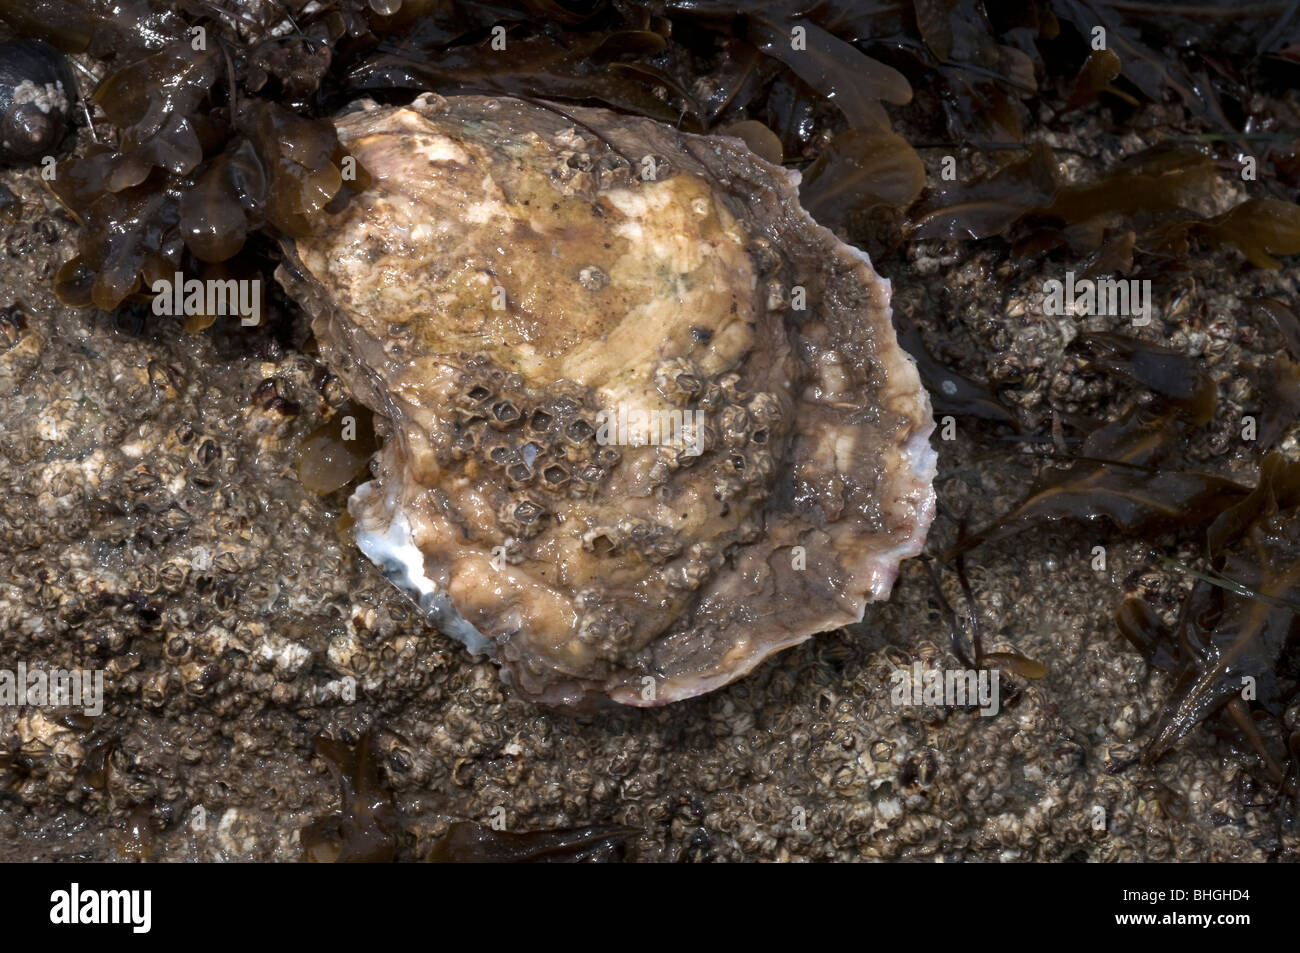 Common Oyster, Flat Oyster, European Flat Oyster (Ostrea edulis), living animal attached to a rock. Stock Photo